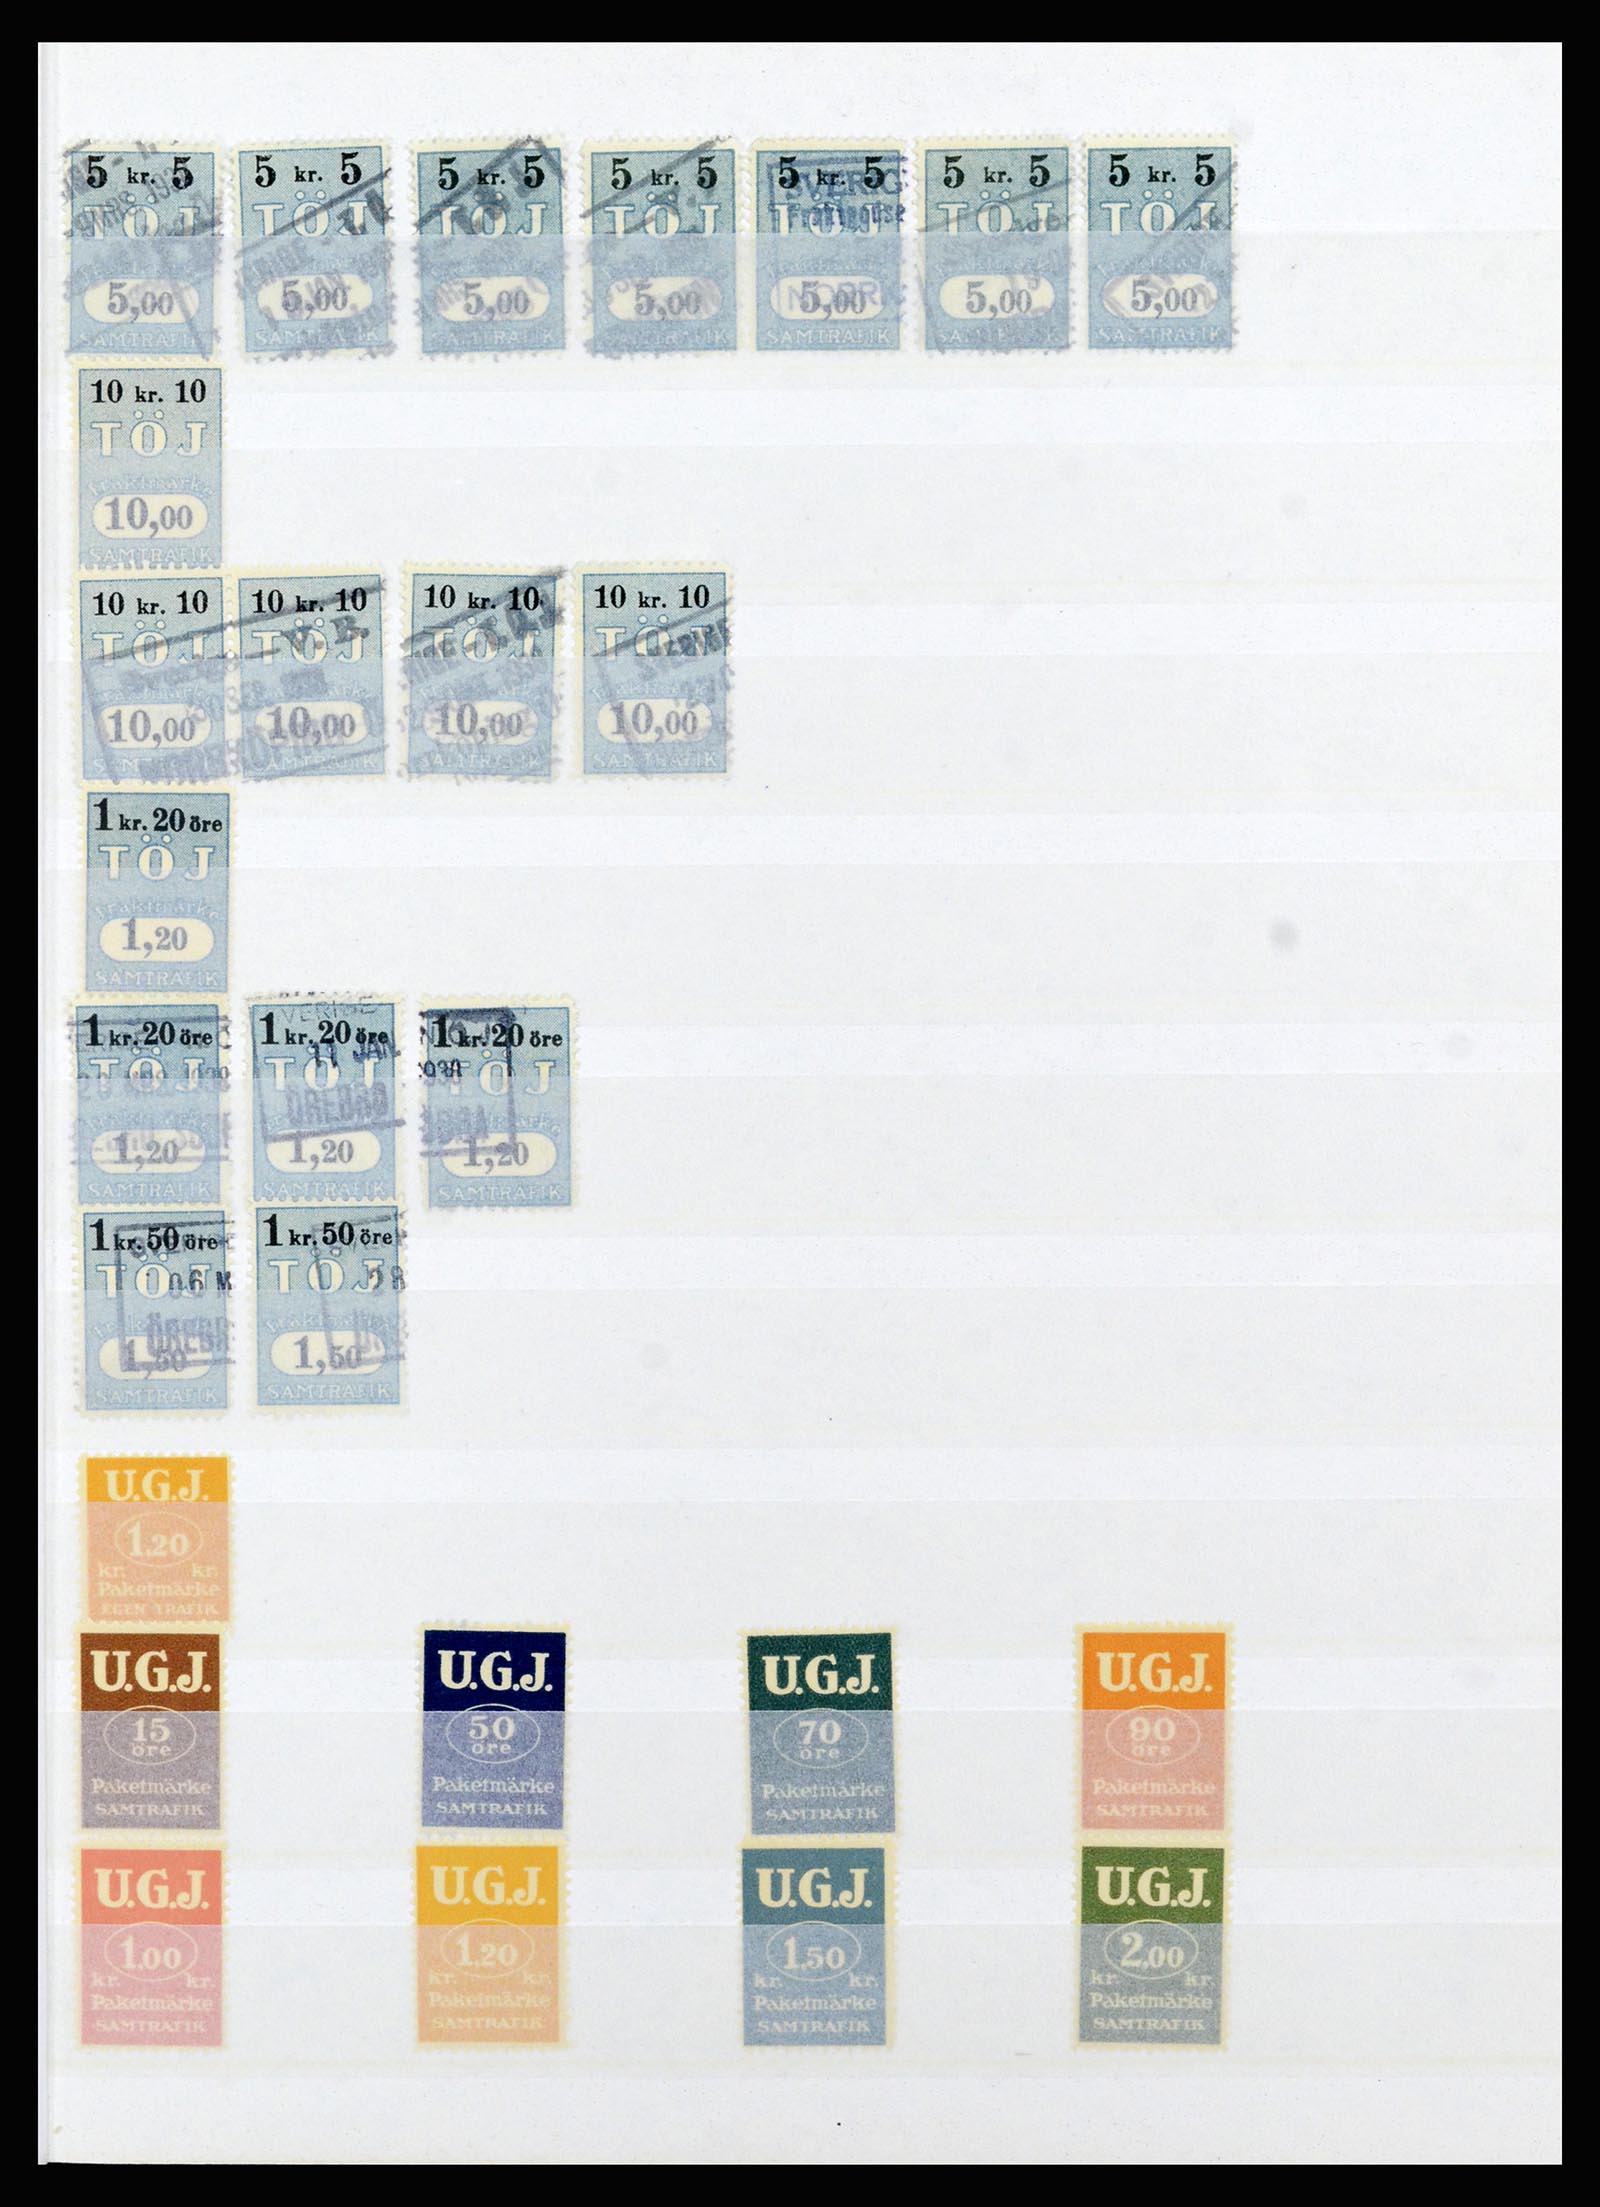 36981 023 - Stamp collection 36981 Scandinavia railroadstamps.